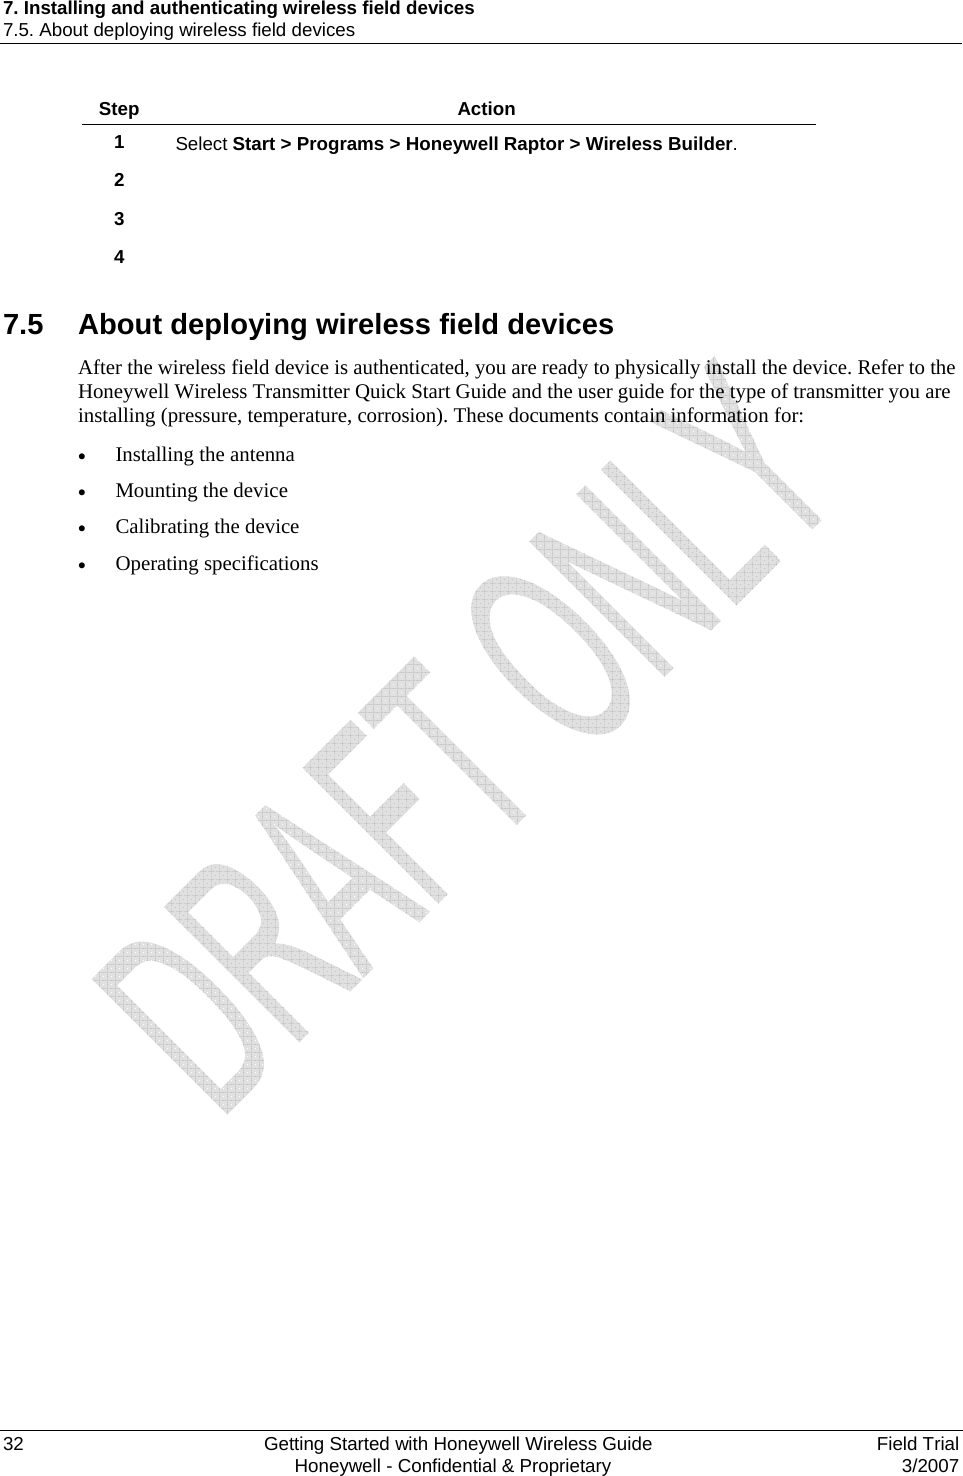 7. Installing and authenticating wireless field devices 7.5. About deploying wireless field devices 32    Getting Started with Honeywell Wireless Guide  Field Trial   Honeywell - Confidential &amp; Proprietary  3/2007 Step  Action 1  Select Start &gt; Programs &gt; Honeywell Raptor &gt; Wireless Builder. 2   3   4    7.5  About deploying wireless field devices After the wireless field device is authenticated, you are ready to physically install the device. Refer to the Honeywell Wireless Transmitter Quick Start Guide and the user guide for the type of transmitter you are installing (pressure, temperature, corrosion). These documents contain information for: • Installing the antenna • Mounting the device • Calibrating the device • Operating specifications  